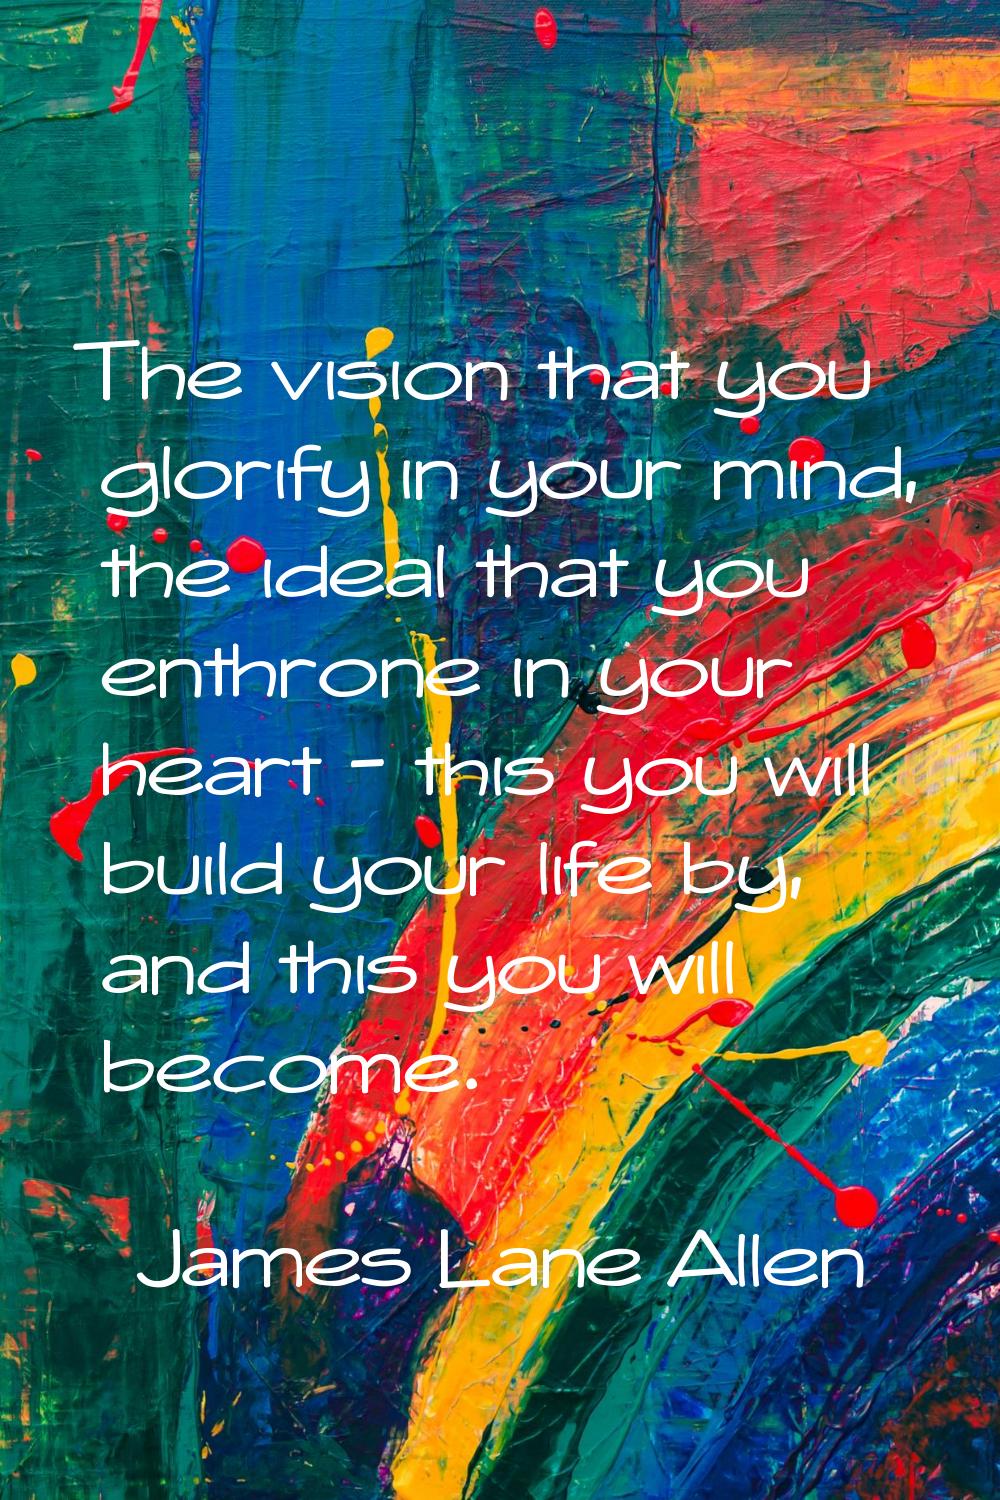 The vision that you glorify in your mind, the ideal that you enthrone in your heart - this you will